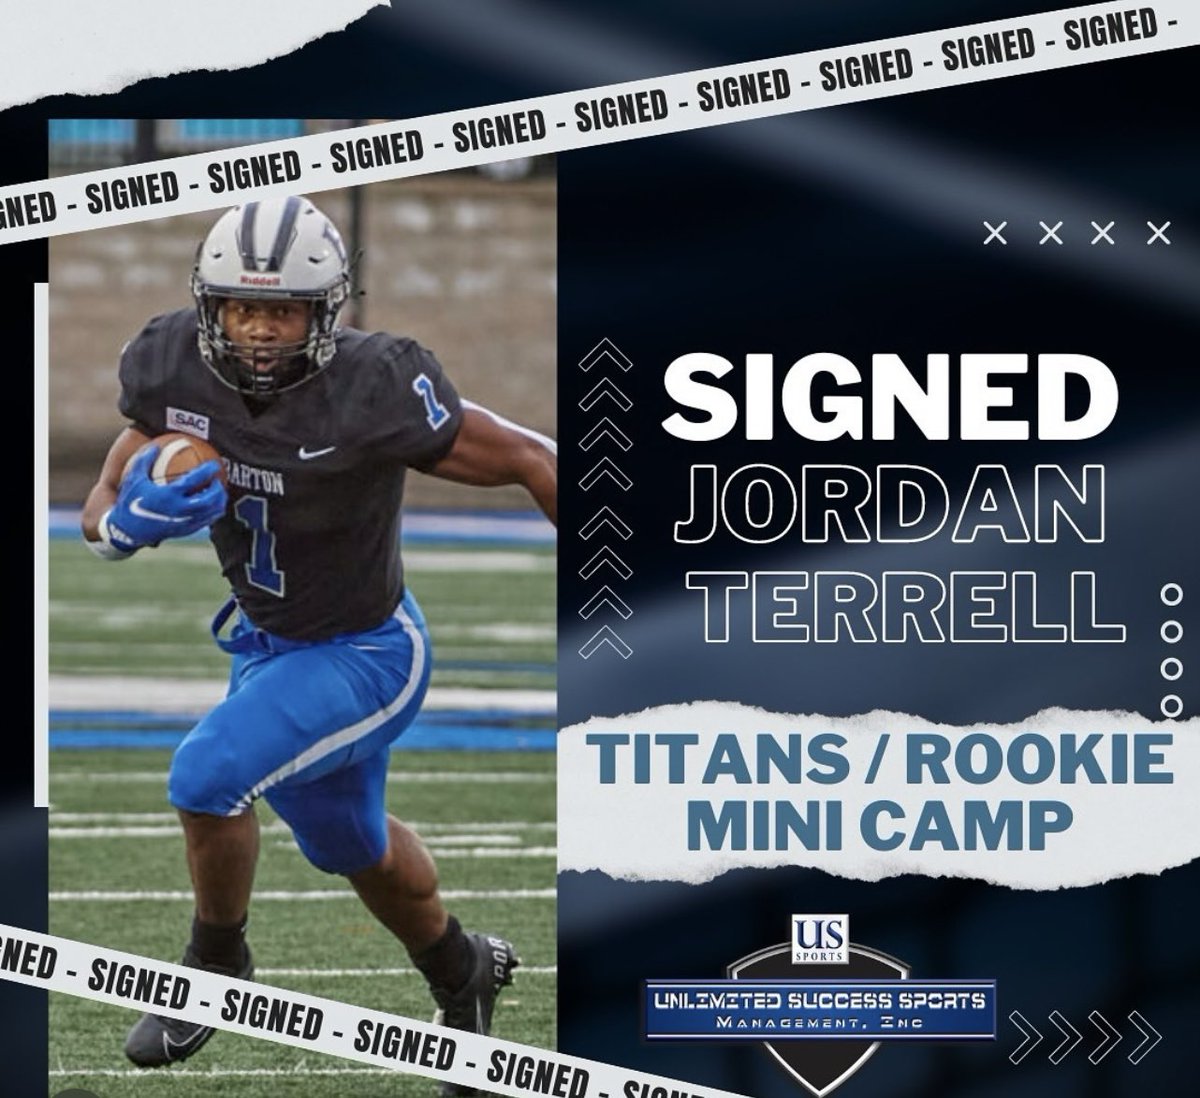 D2 All-American Barton College RB Jordan Terrell has signed with the @Titans as an UDFA!! Considered as one of the top RBs in D2 over the last 3 seasons, Terrell led all levels of the NCAA in rushing through week 3 in 2023, was the all-purpose yards leader for D2 in 2023, and